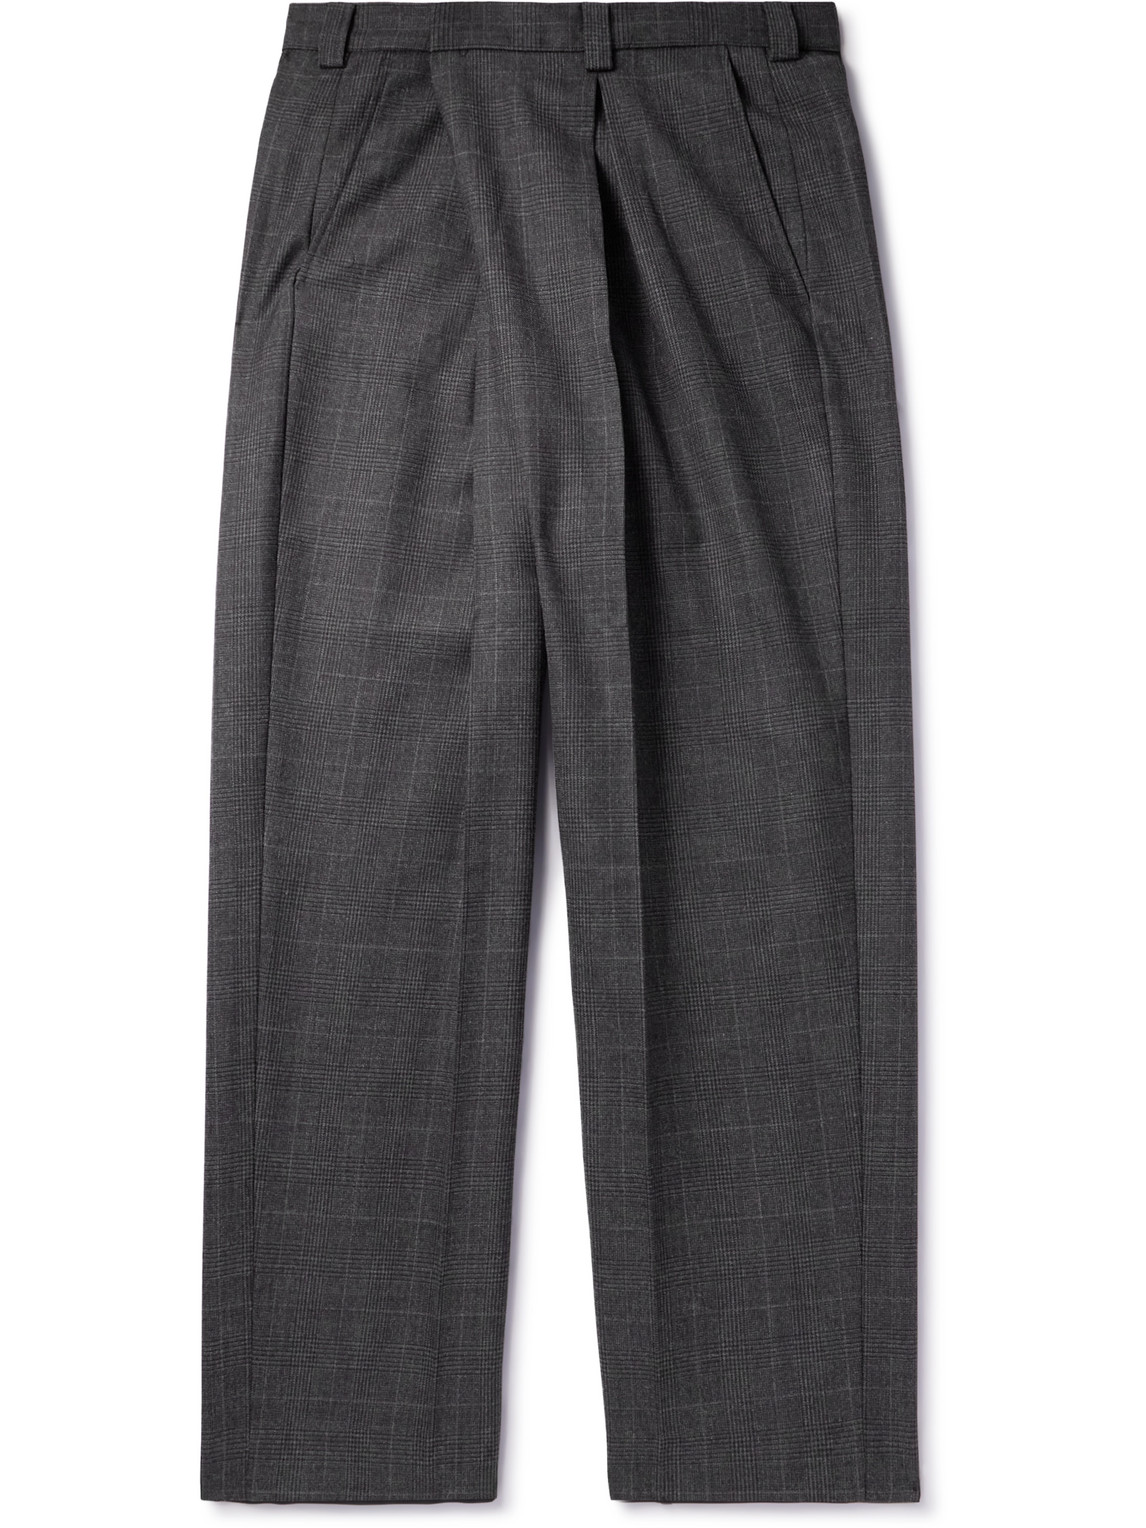 ACNE STUDIOS WIDE-LEG PRINCE OF WALES WOVEN TROUSERS